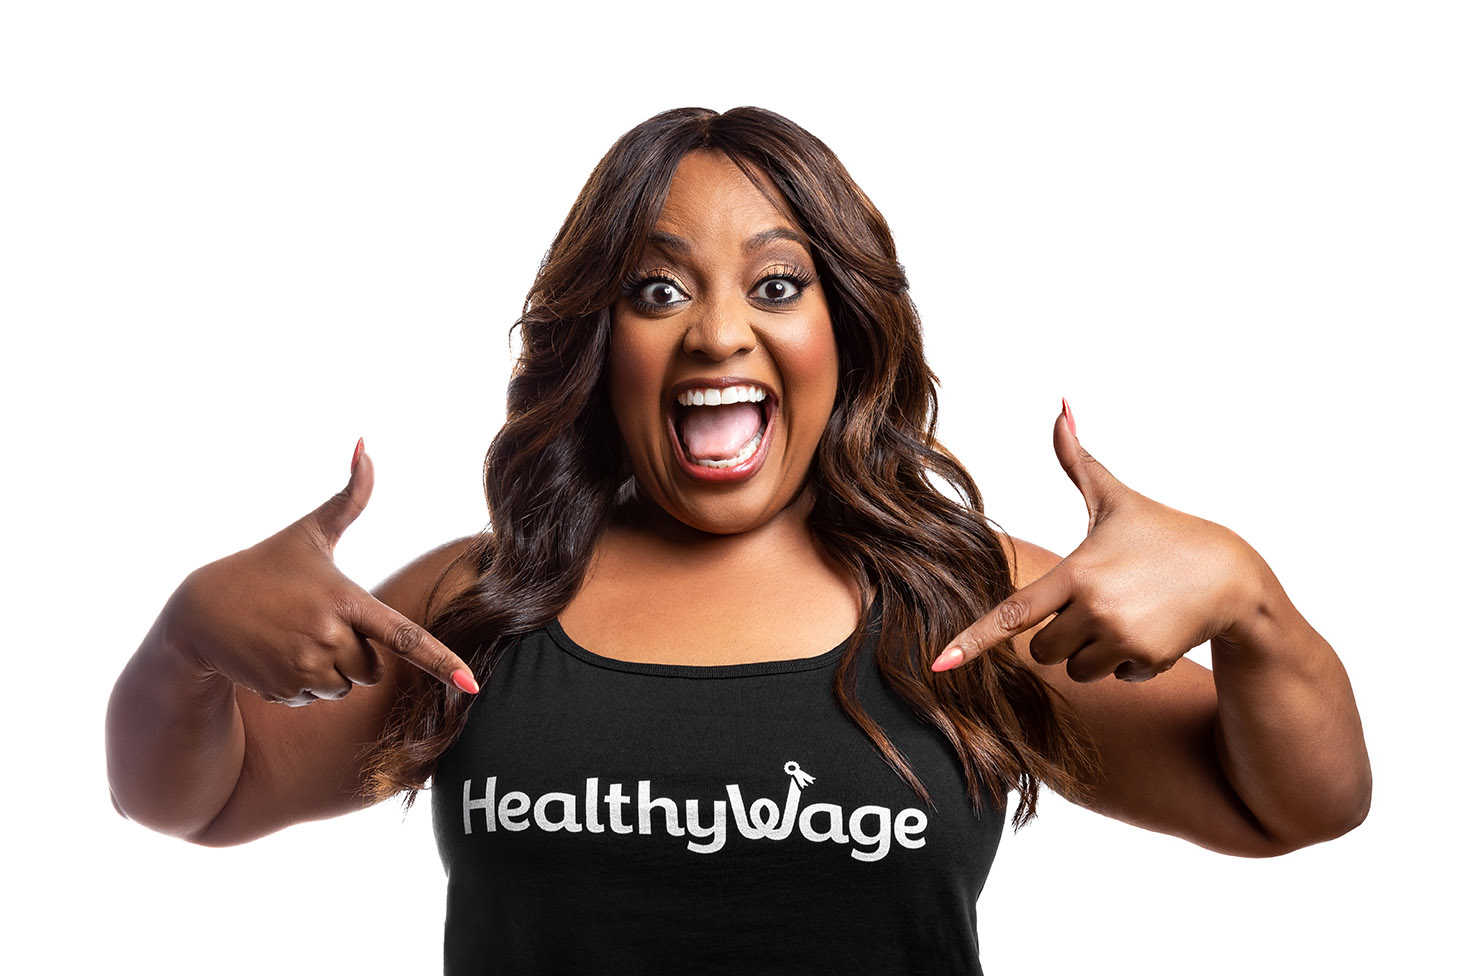 Celebrity Sherri Shepherd & HealthyWage Partner to Pay $10,000 to Dieters Achieving Weight Loss Goal